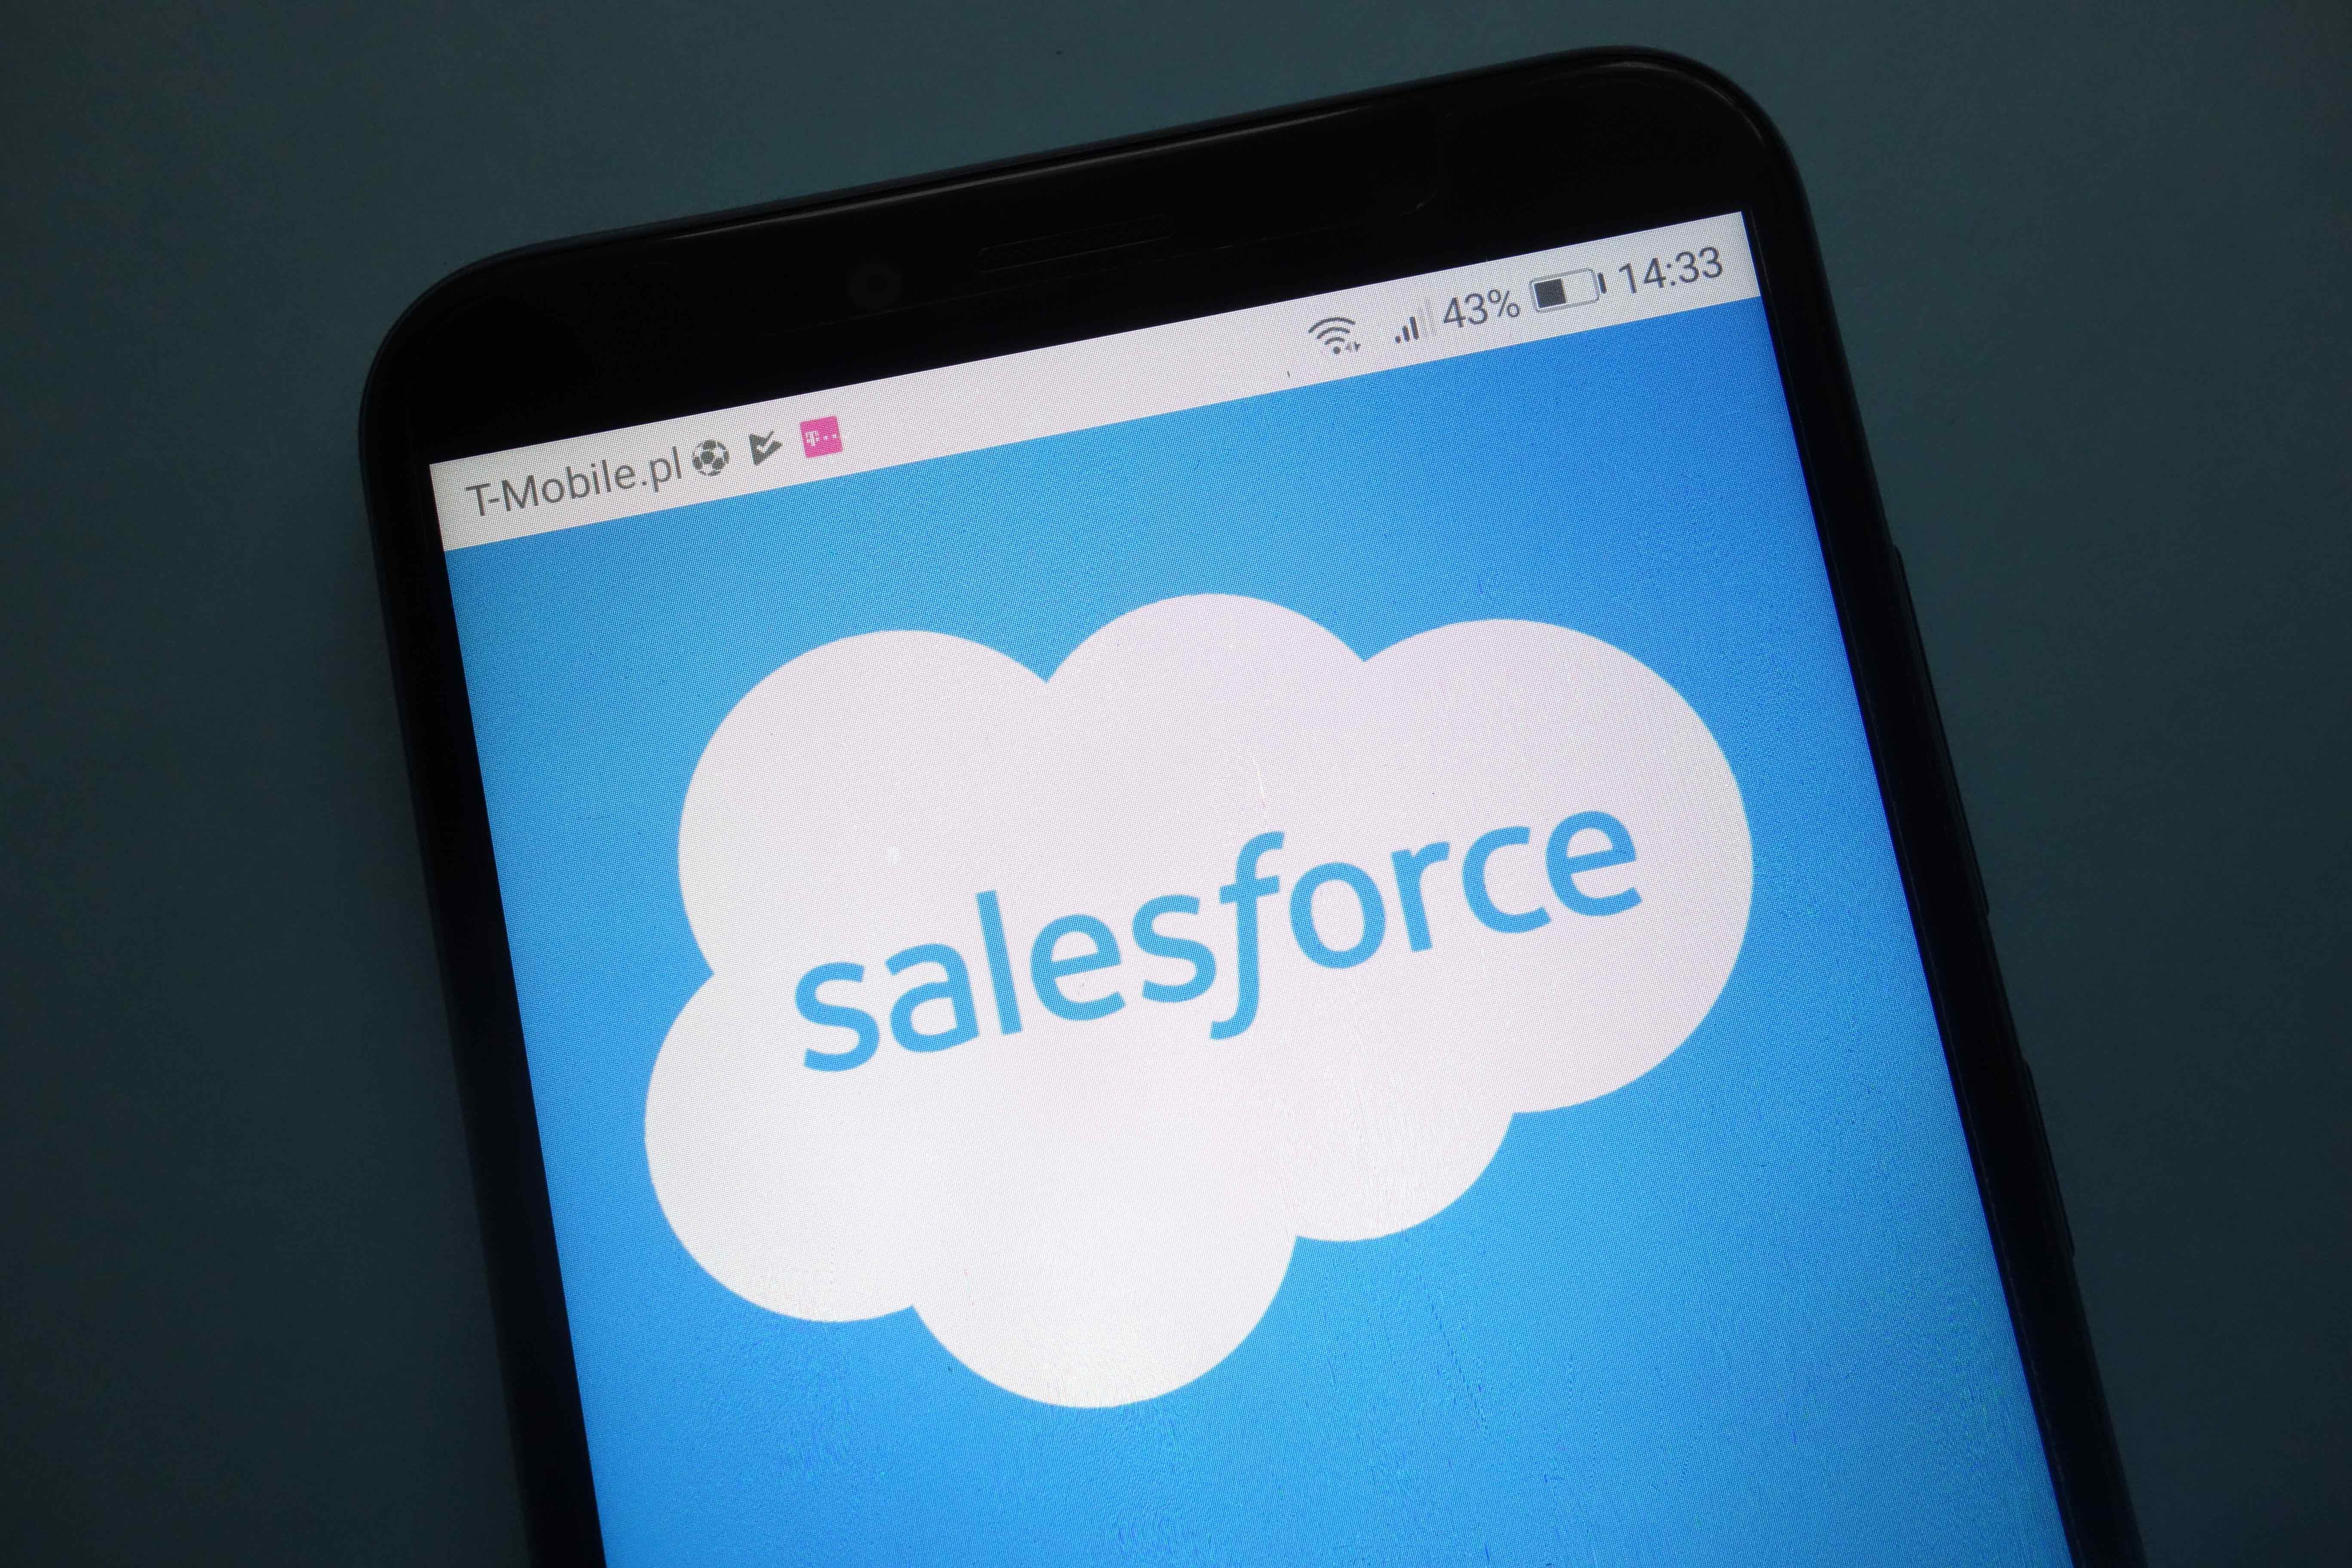 Cloud Giant Salesforce Unveils First Blockchain Product For Business